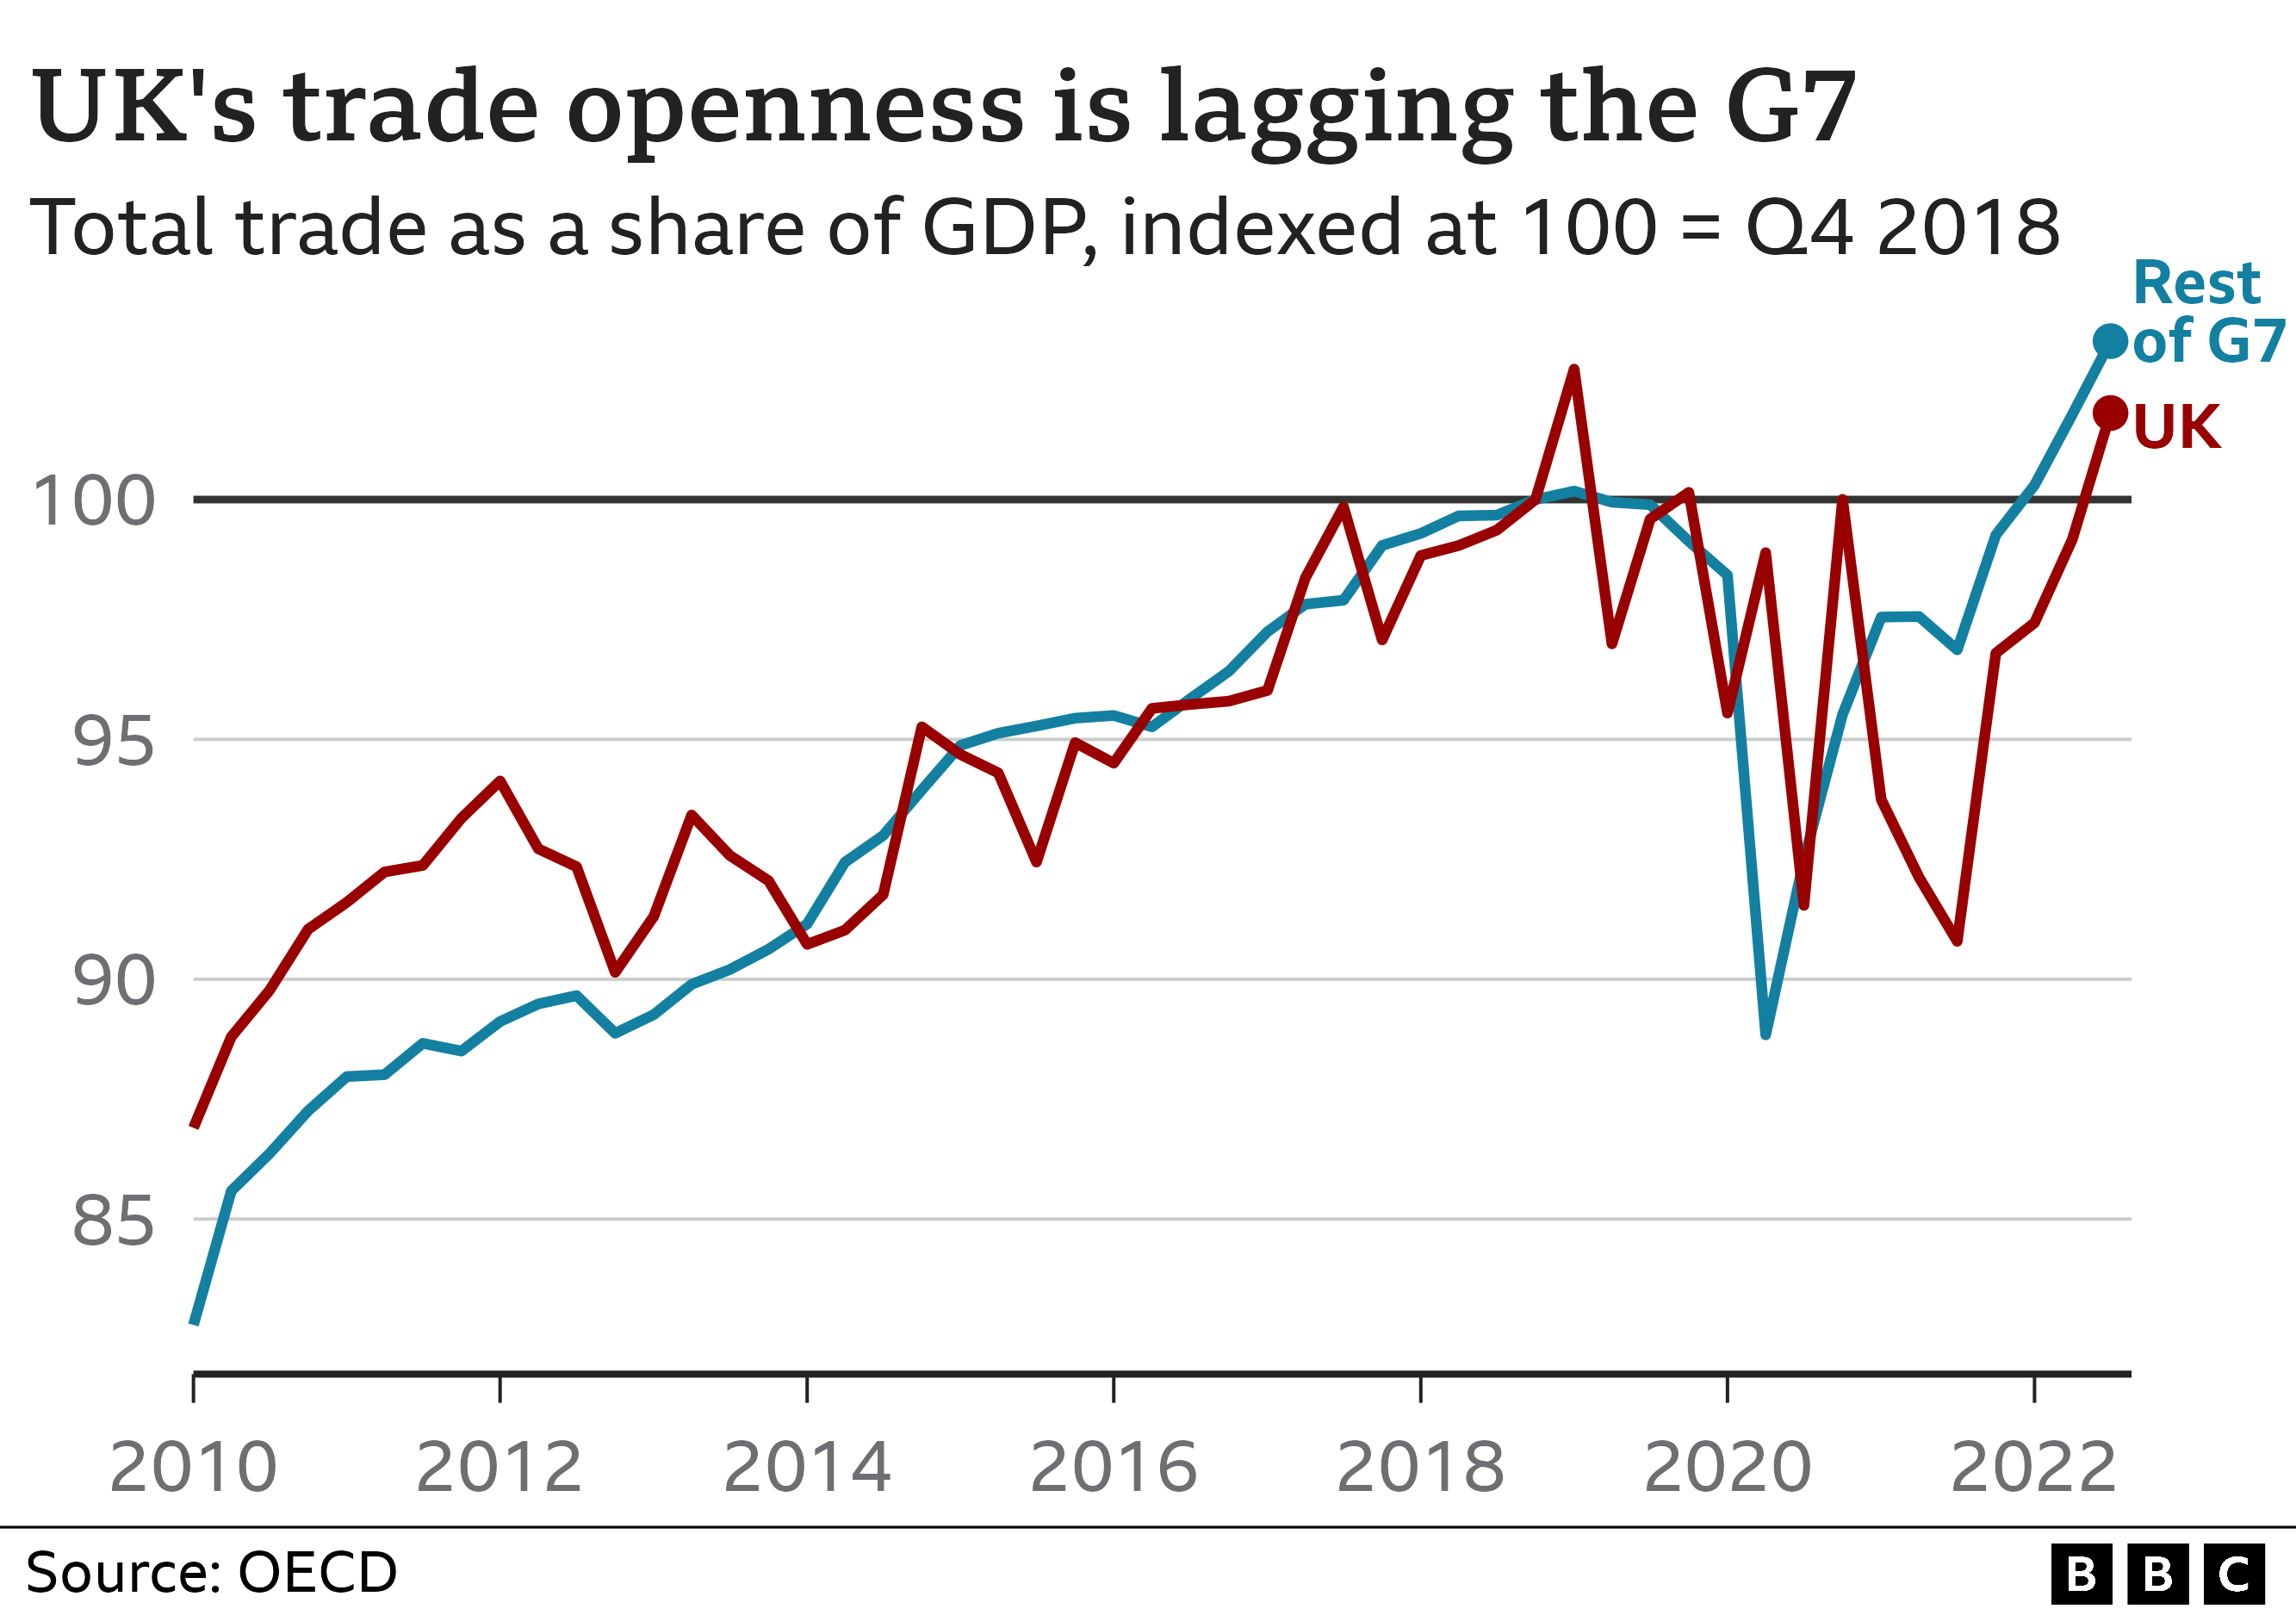 Line chart showing the sum of the UK's imports and exports divided by its GDP, compared to an average of equivalent figures for the other members of the G7. The chart shows that trade in the UK has grown less since the last quarter of 2018.